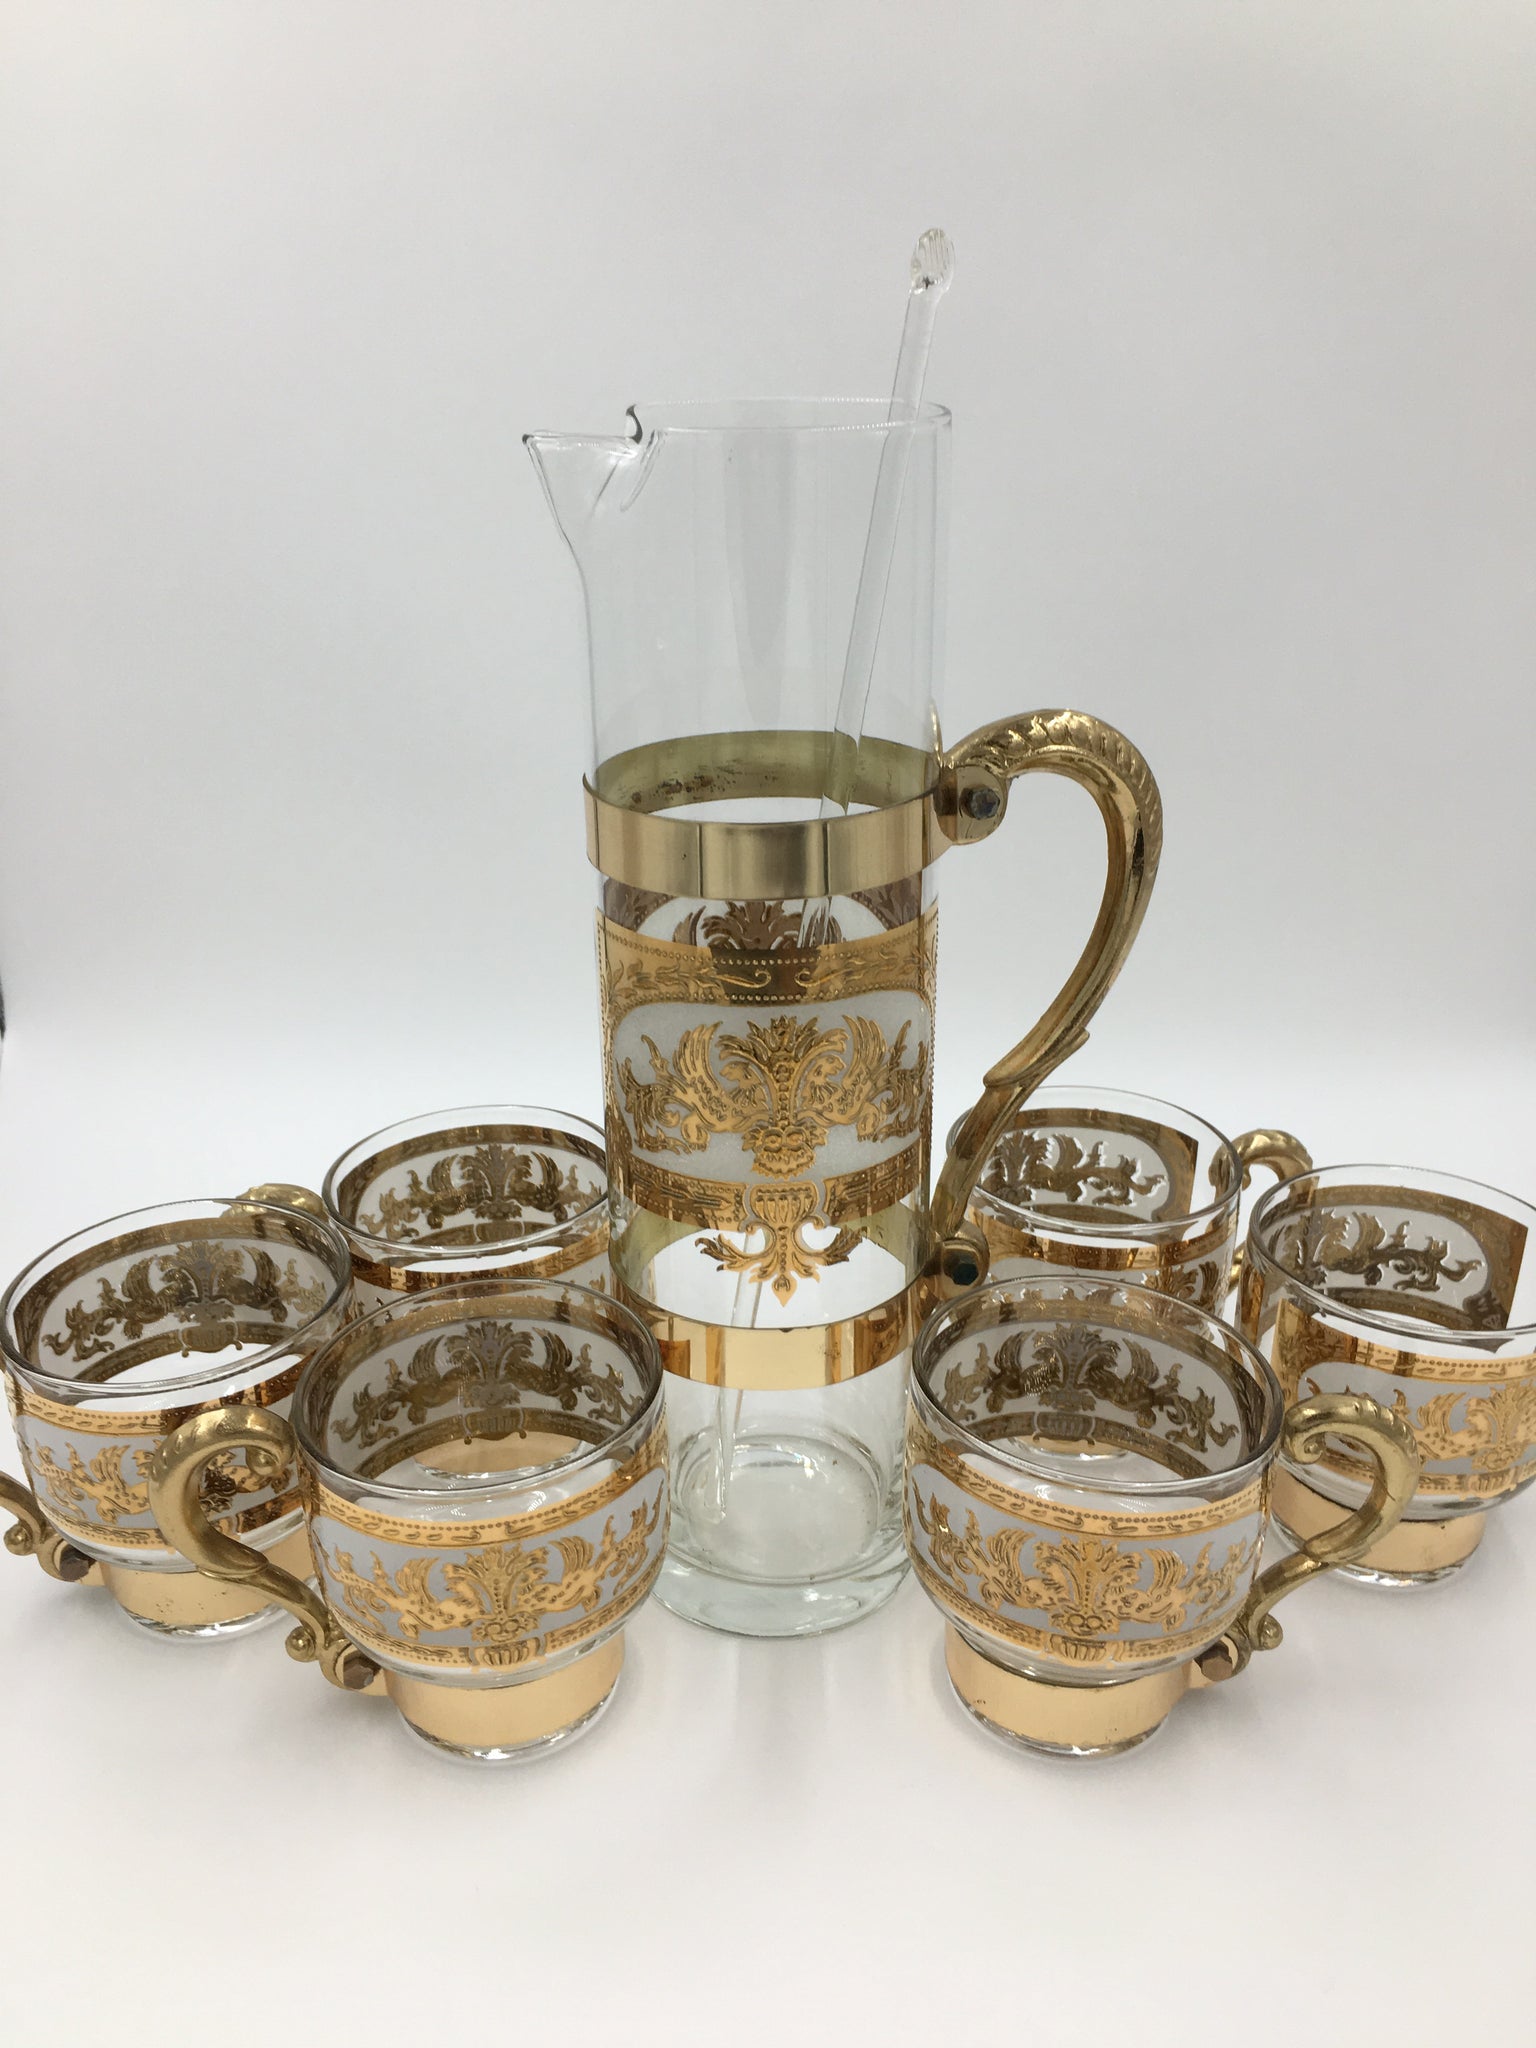 Seven Piece Vintage Gold Band Martini Set, Cocktail Shaker and 6